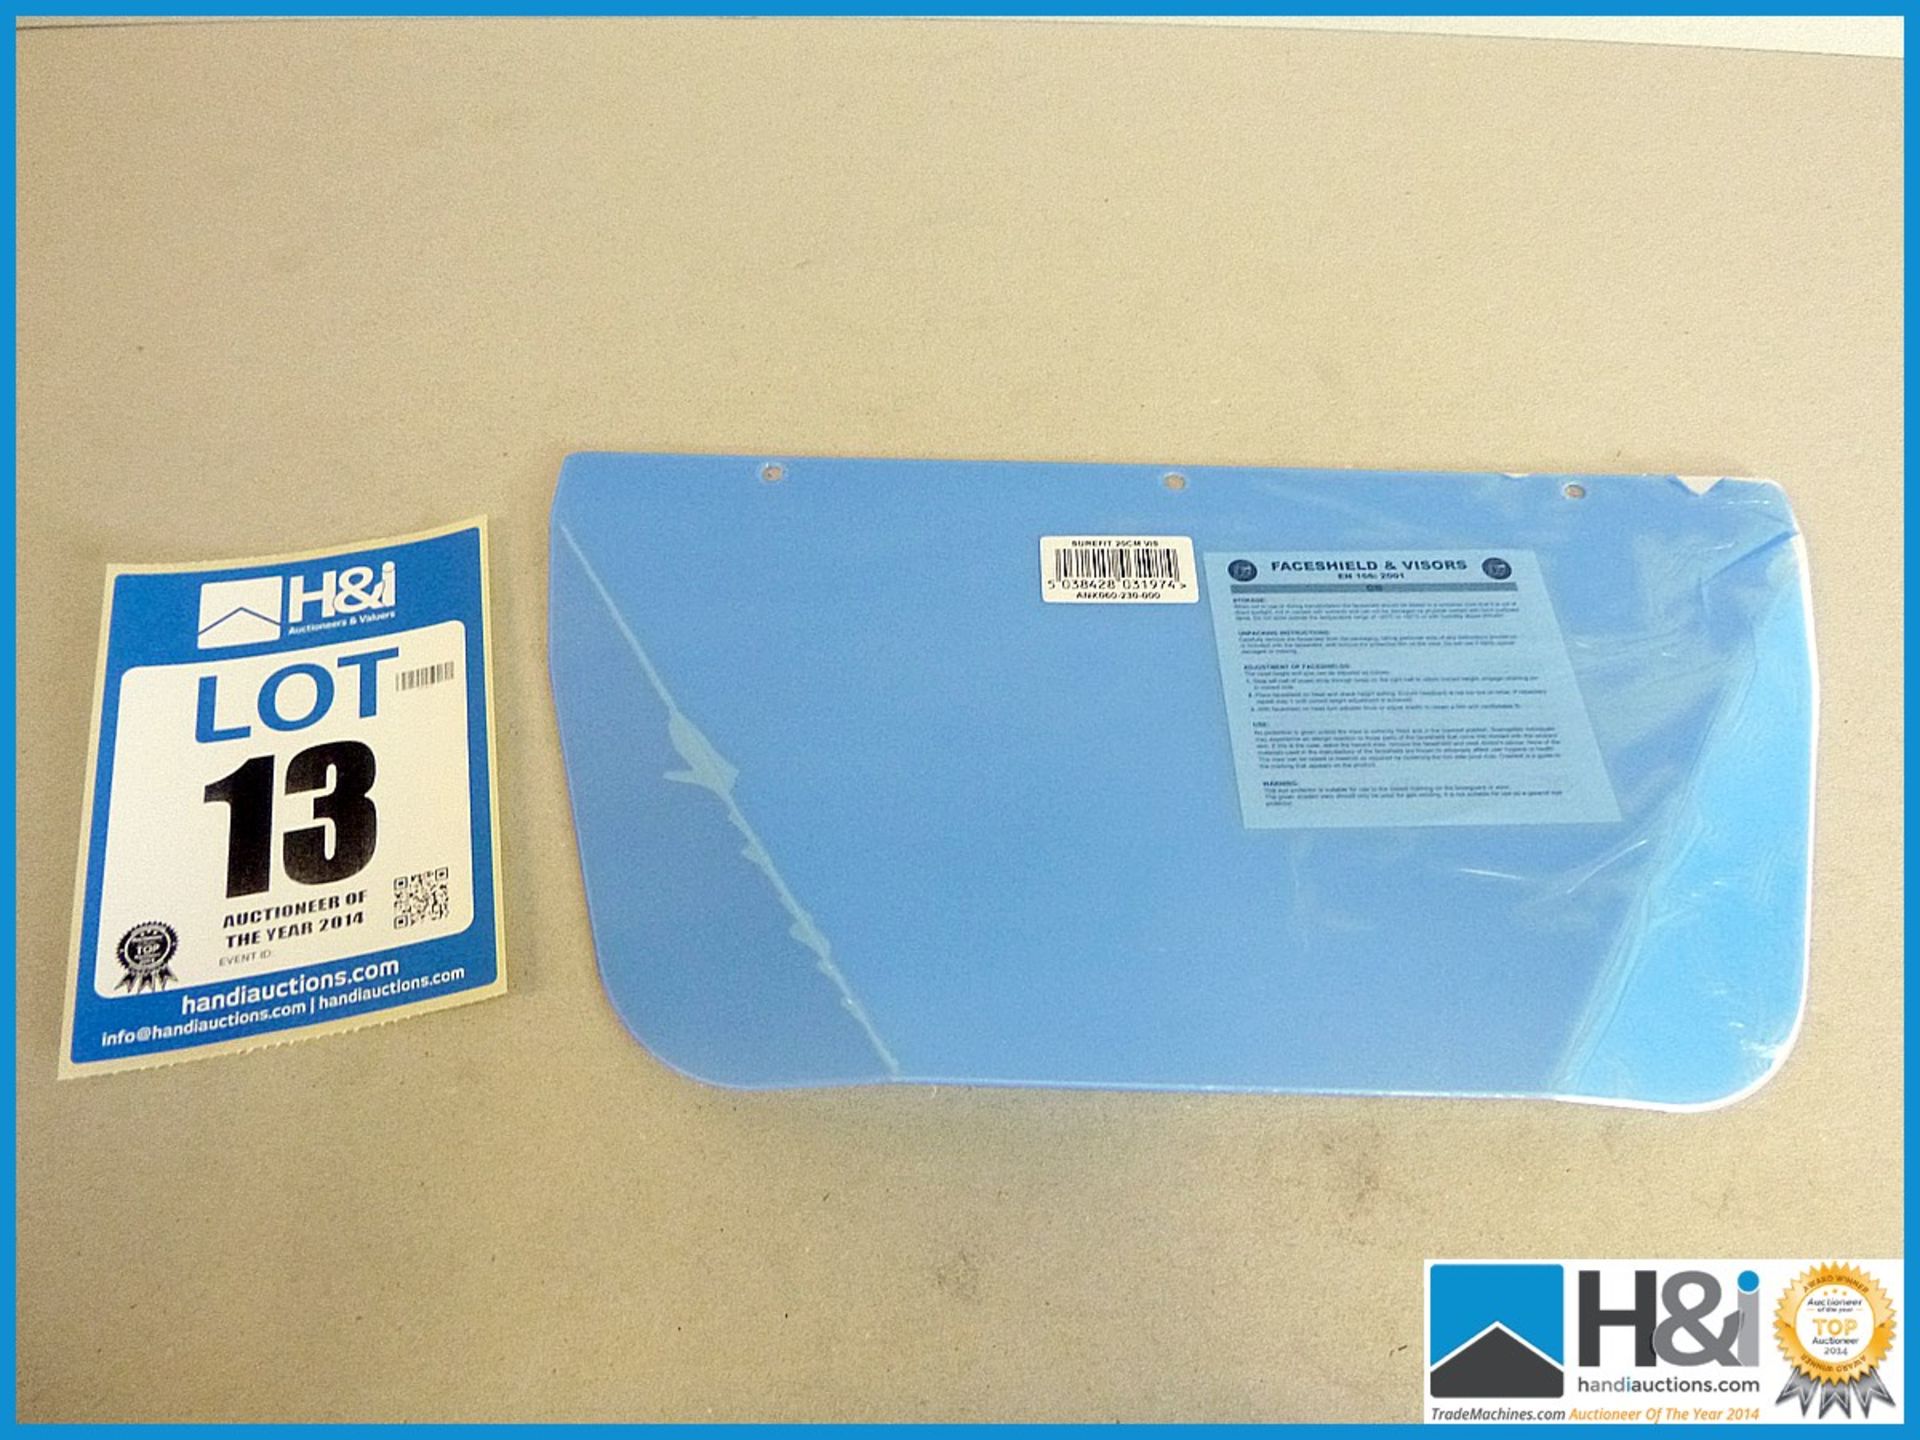 8" VISOR REPLACEMENT CLEAR POLYCARBONATE. x20 items lot value over £50. Appraisal: New, unused in